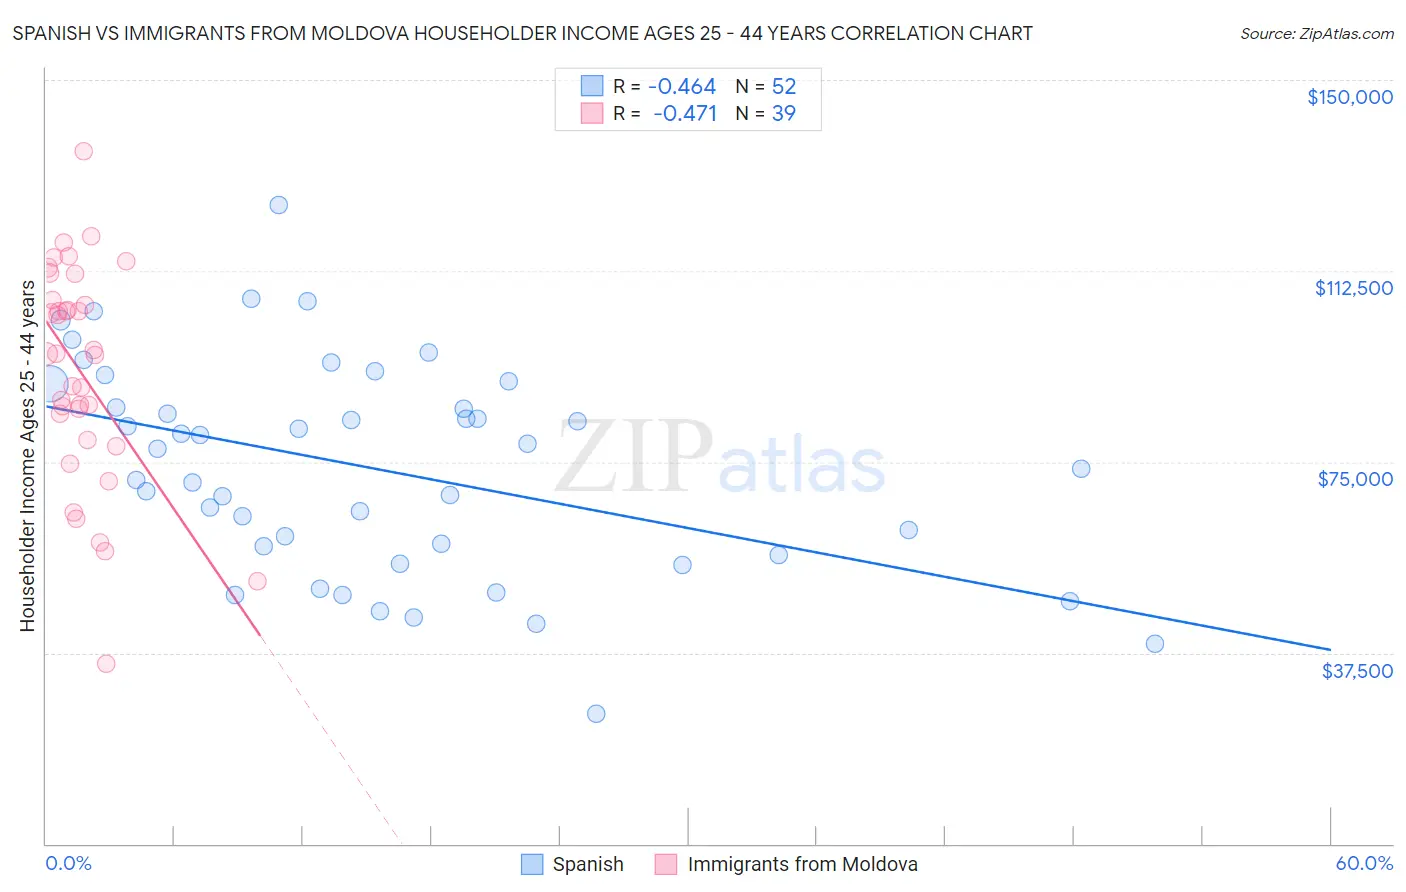 Spanish vs Immigrants from Moldova Householder Income Ages 25 - 44 years